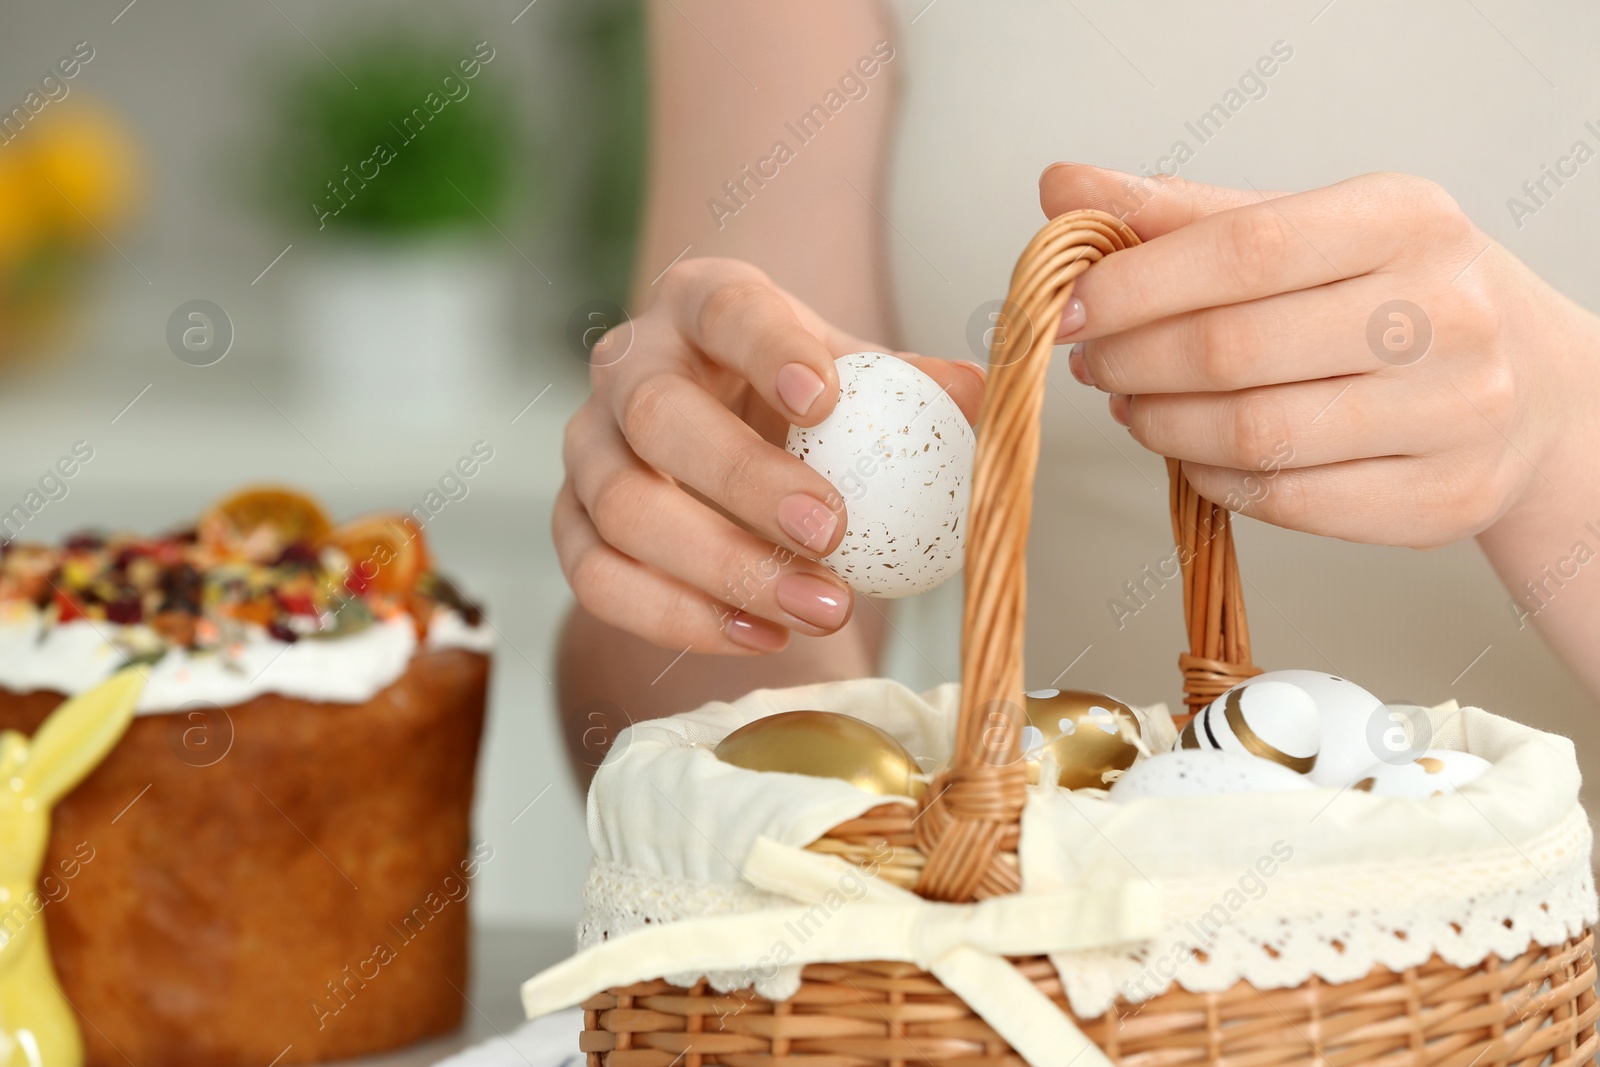 Photo of Closeup of woman putting painted egg into Easter basket near cake